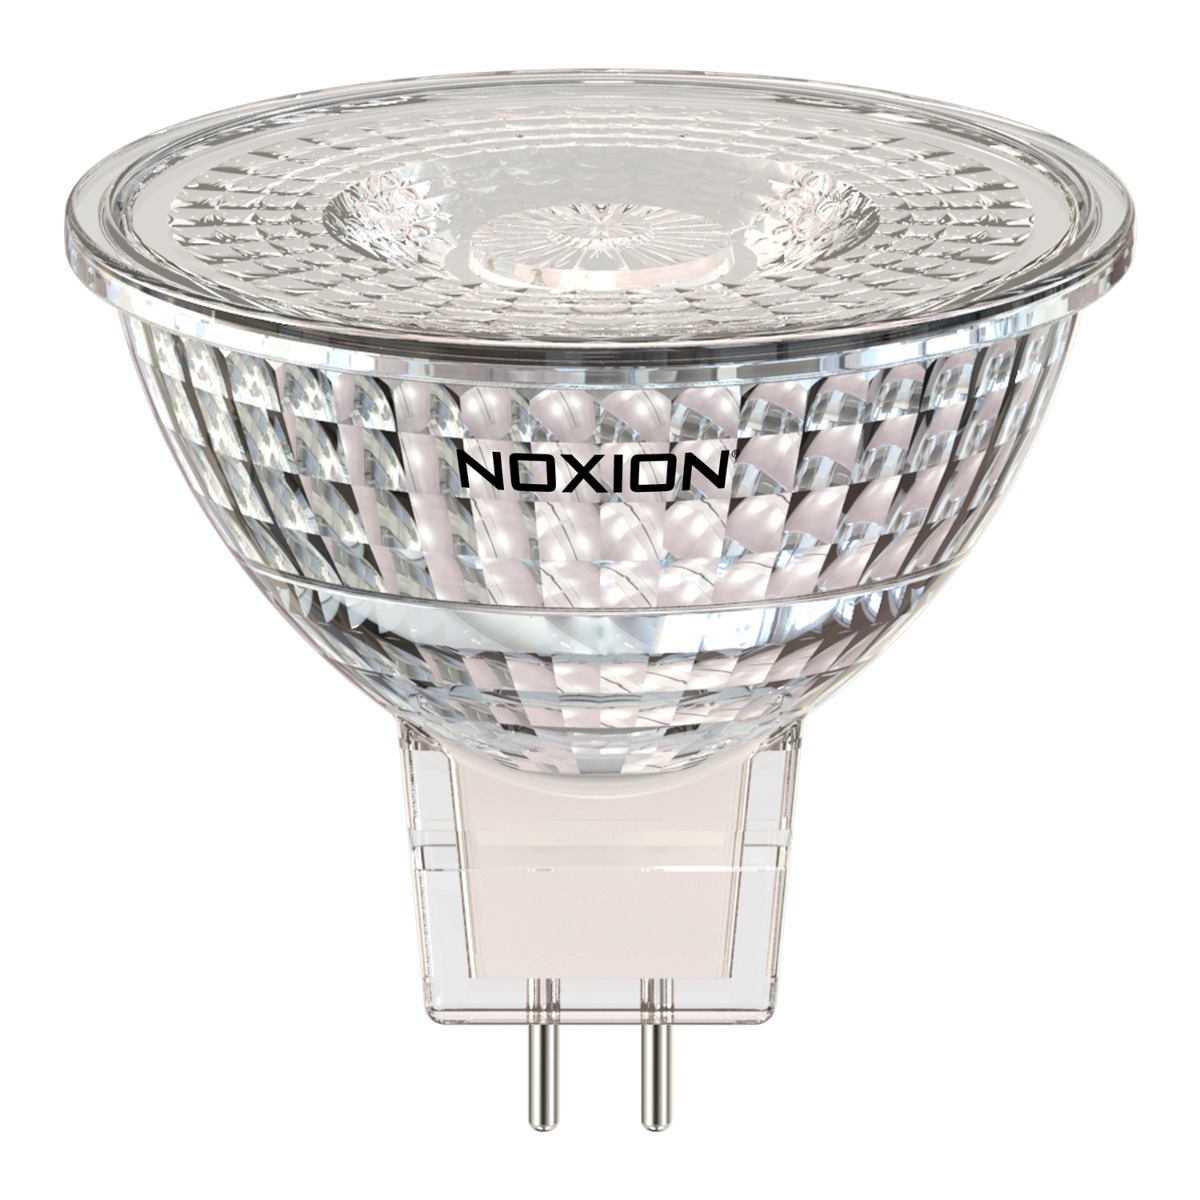 Noxion LED Spot GU5.3 5W 827 36D 470lm | Dimmable - Extra Warm White - Replaces 35W